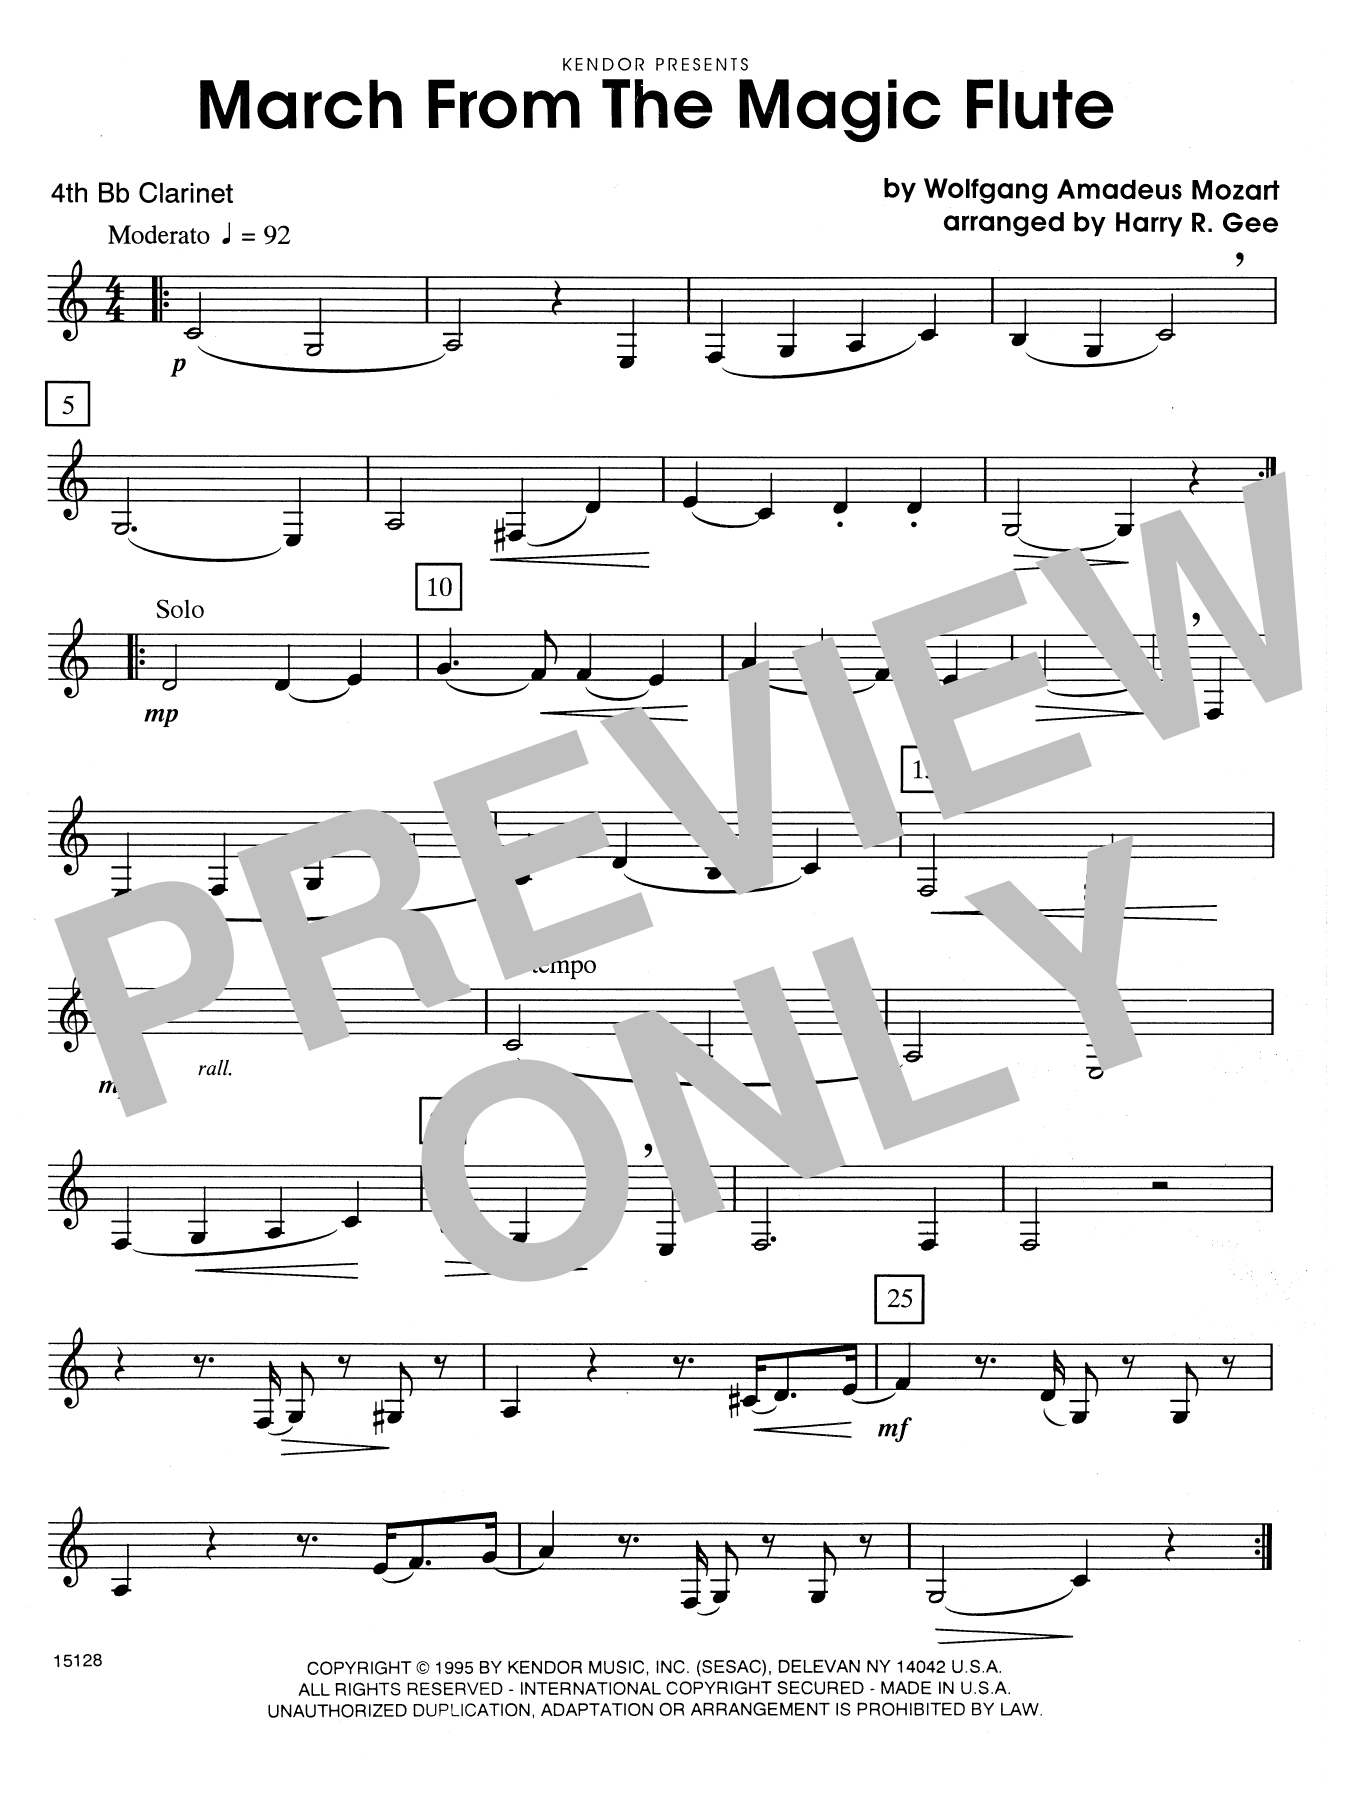 Harry R. Gee March From The Magic Flute - 4th Bb Clarinet sheet music notes and chords. Download Printable PDF.